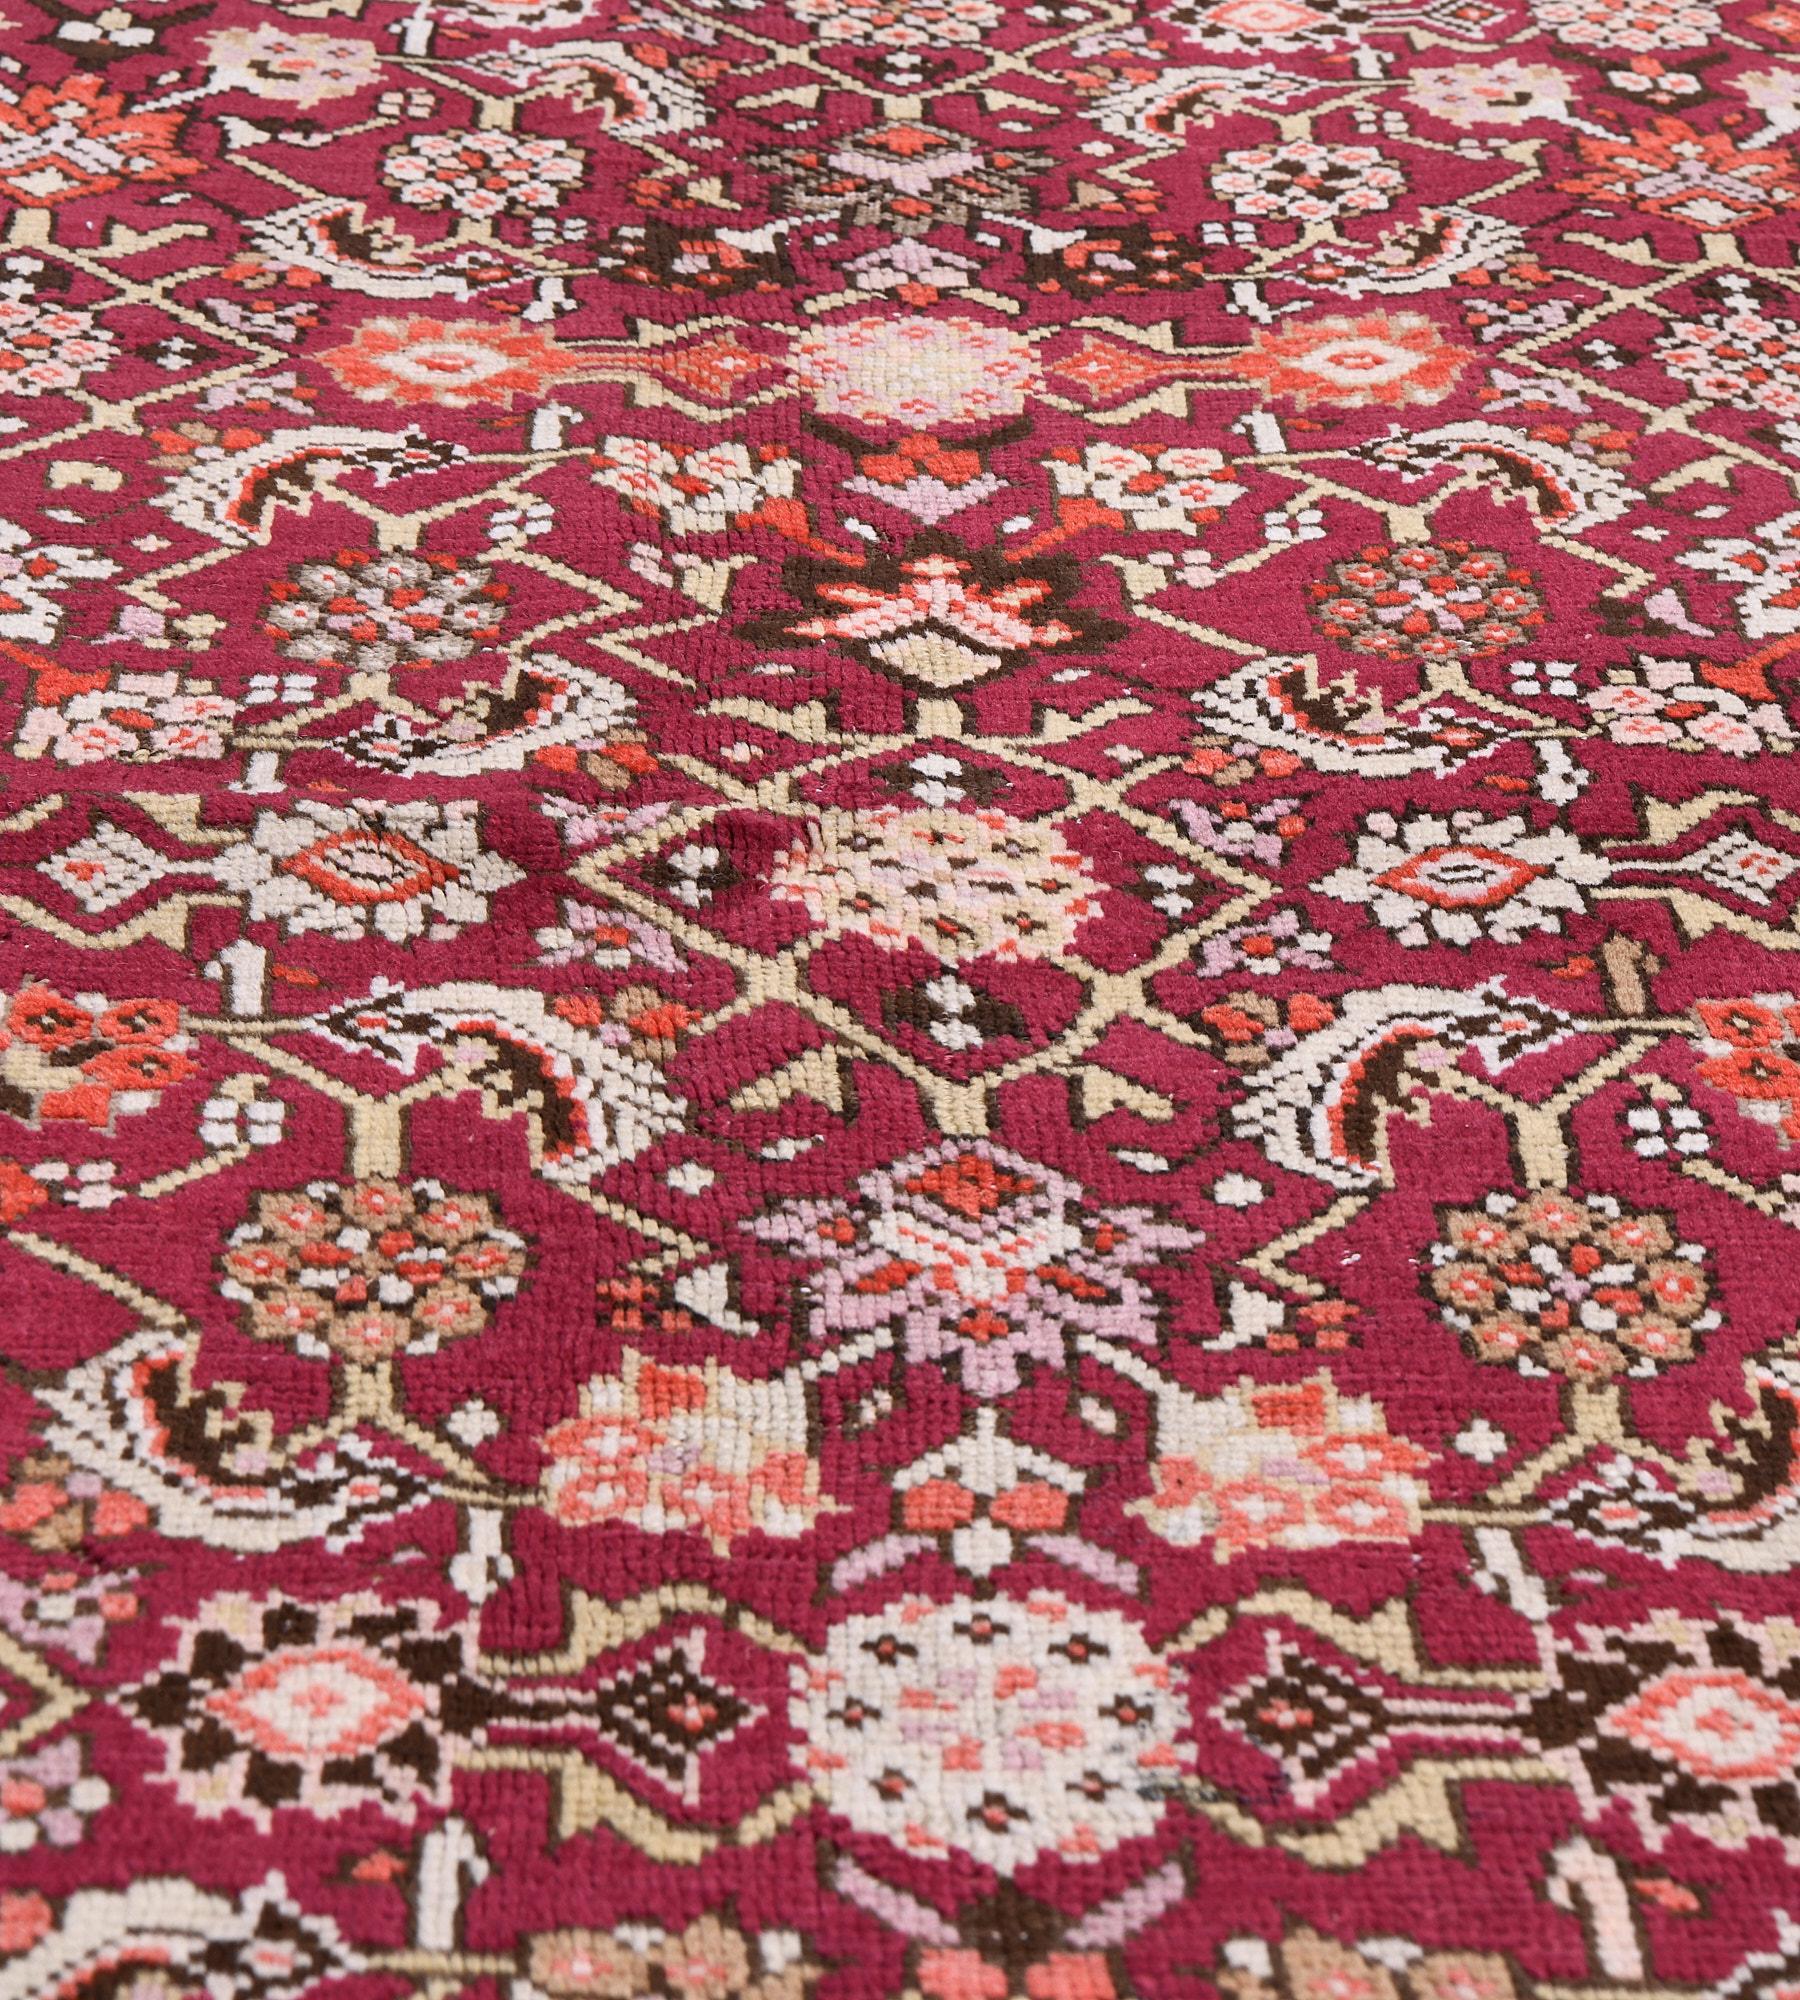 Antique Circa-1910 Floral Red Karabagh Rug In Good Condition For Sale In West Hollywood, CA